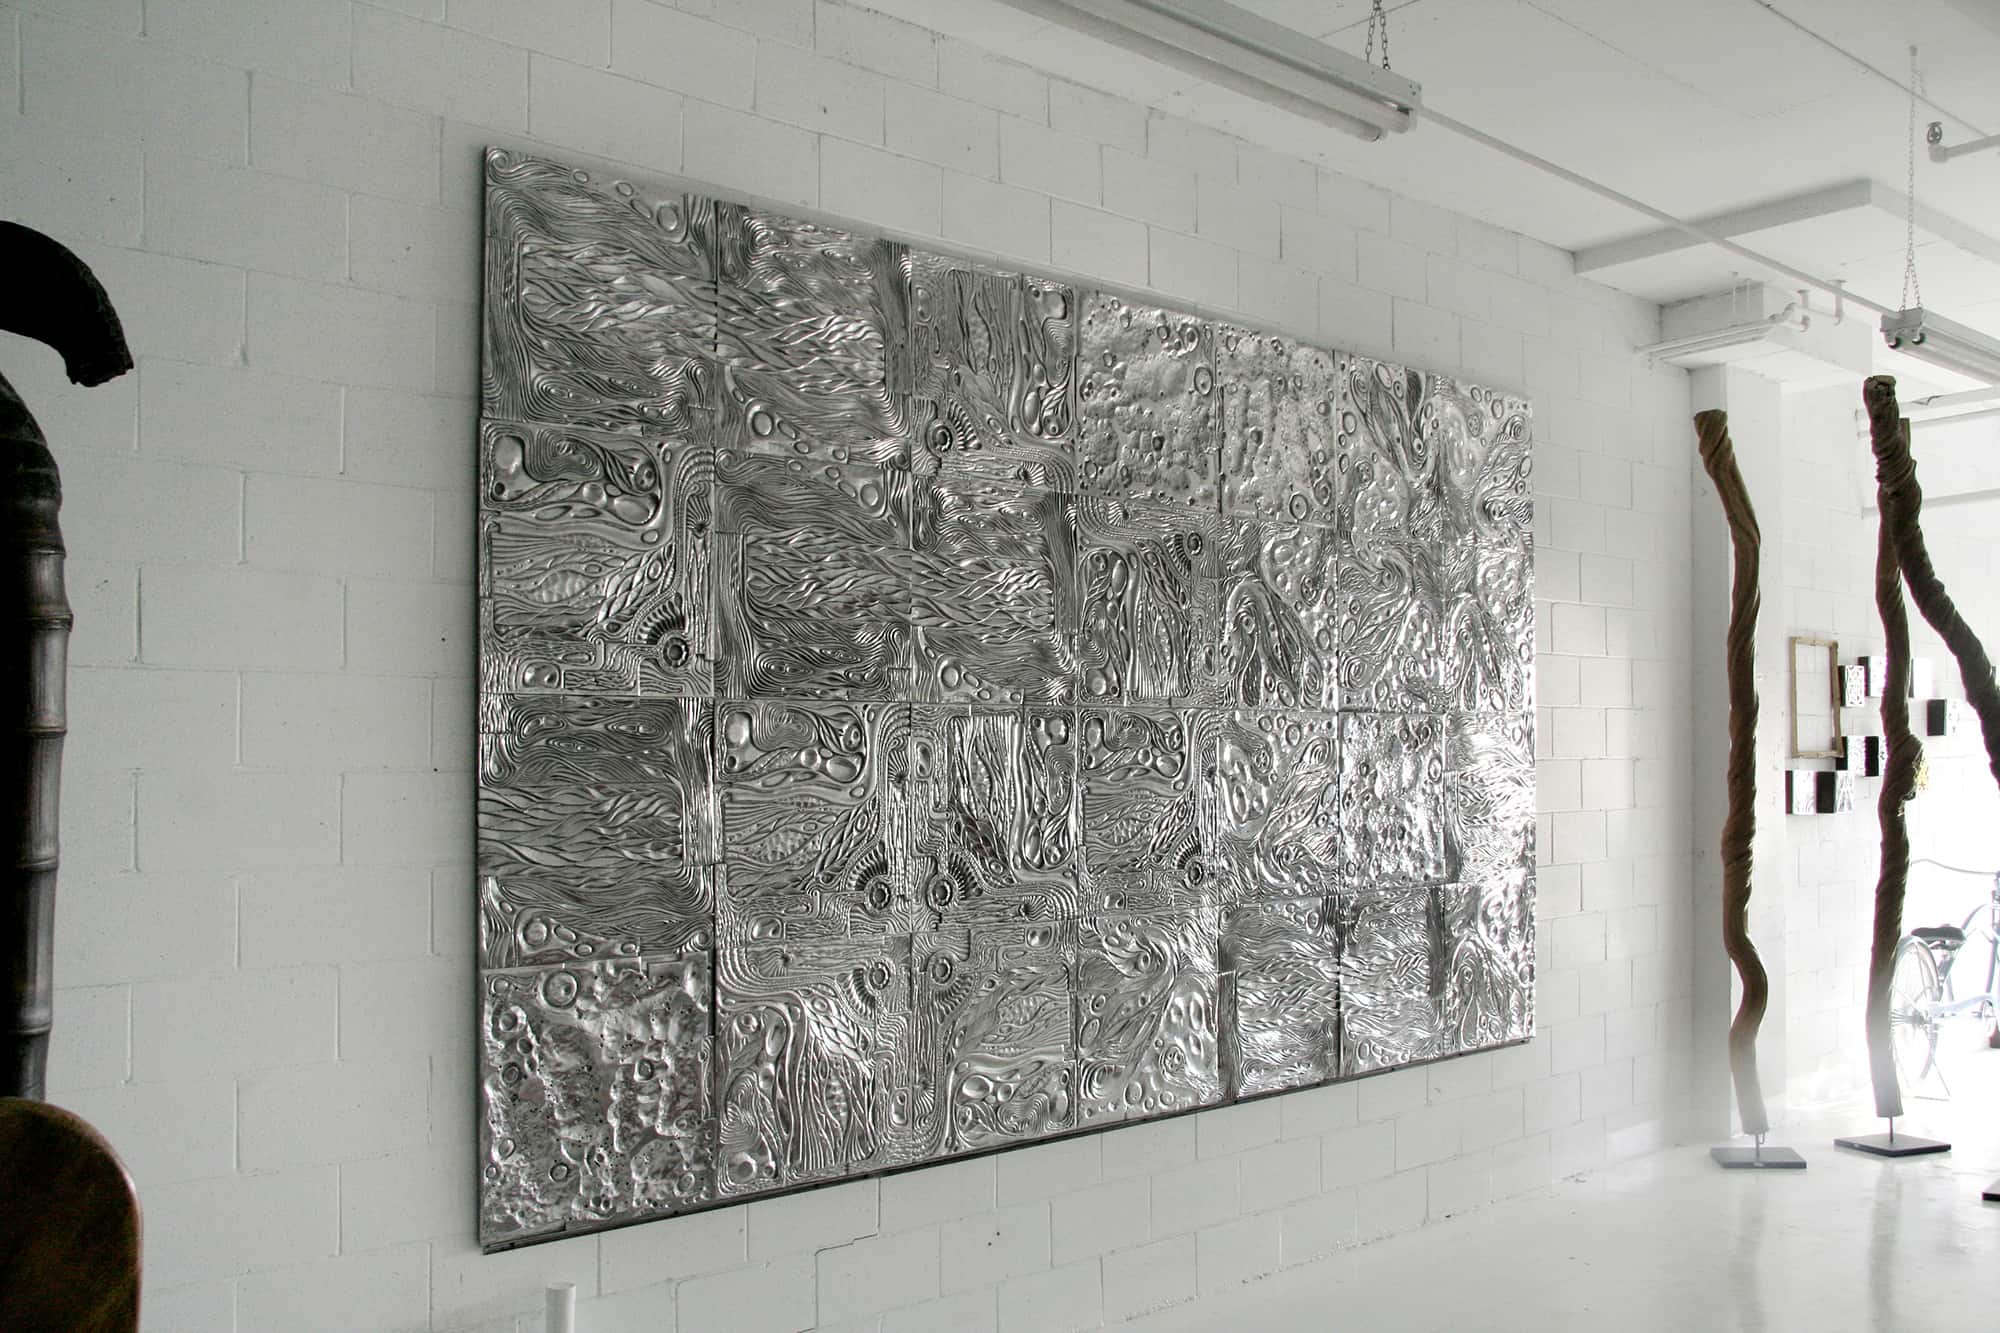 sand-casted and hand-polished recycled aluminium mural work